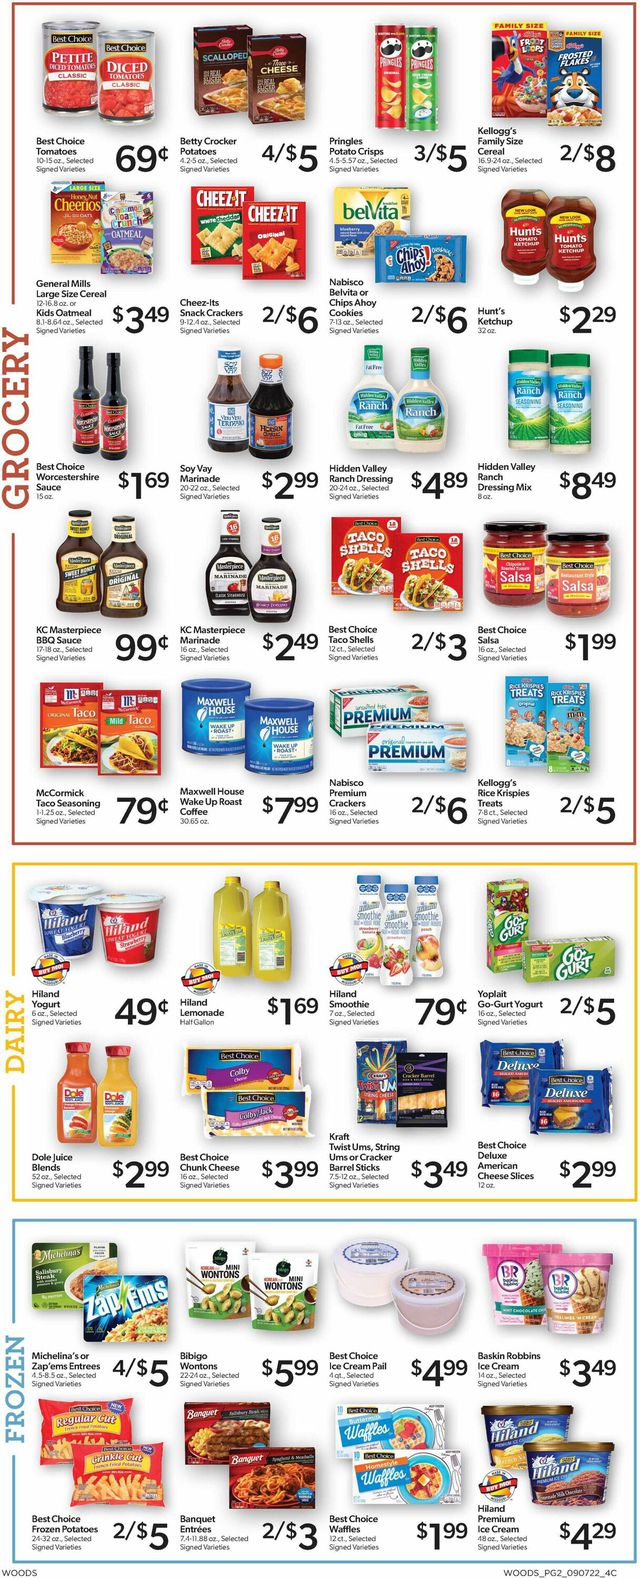 Woods Supermarket Ad from 09/07/2022